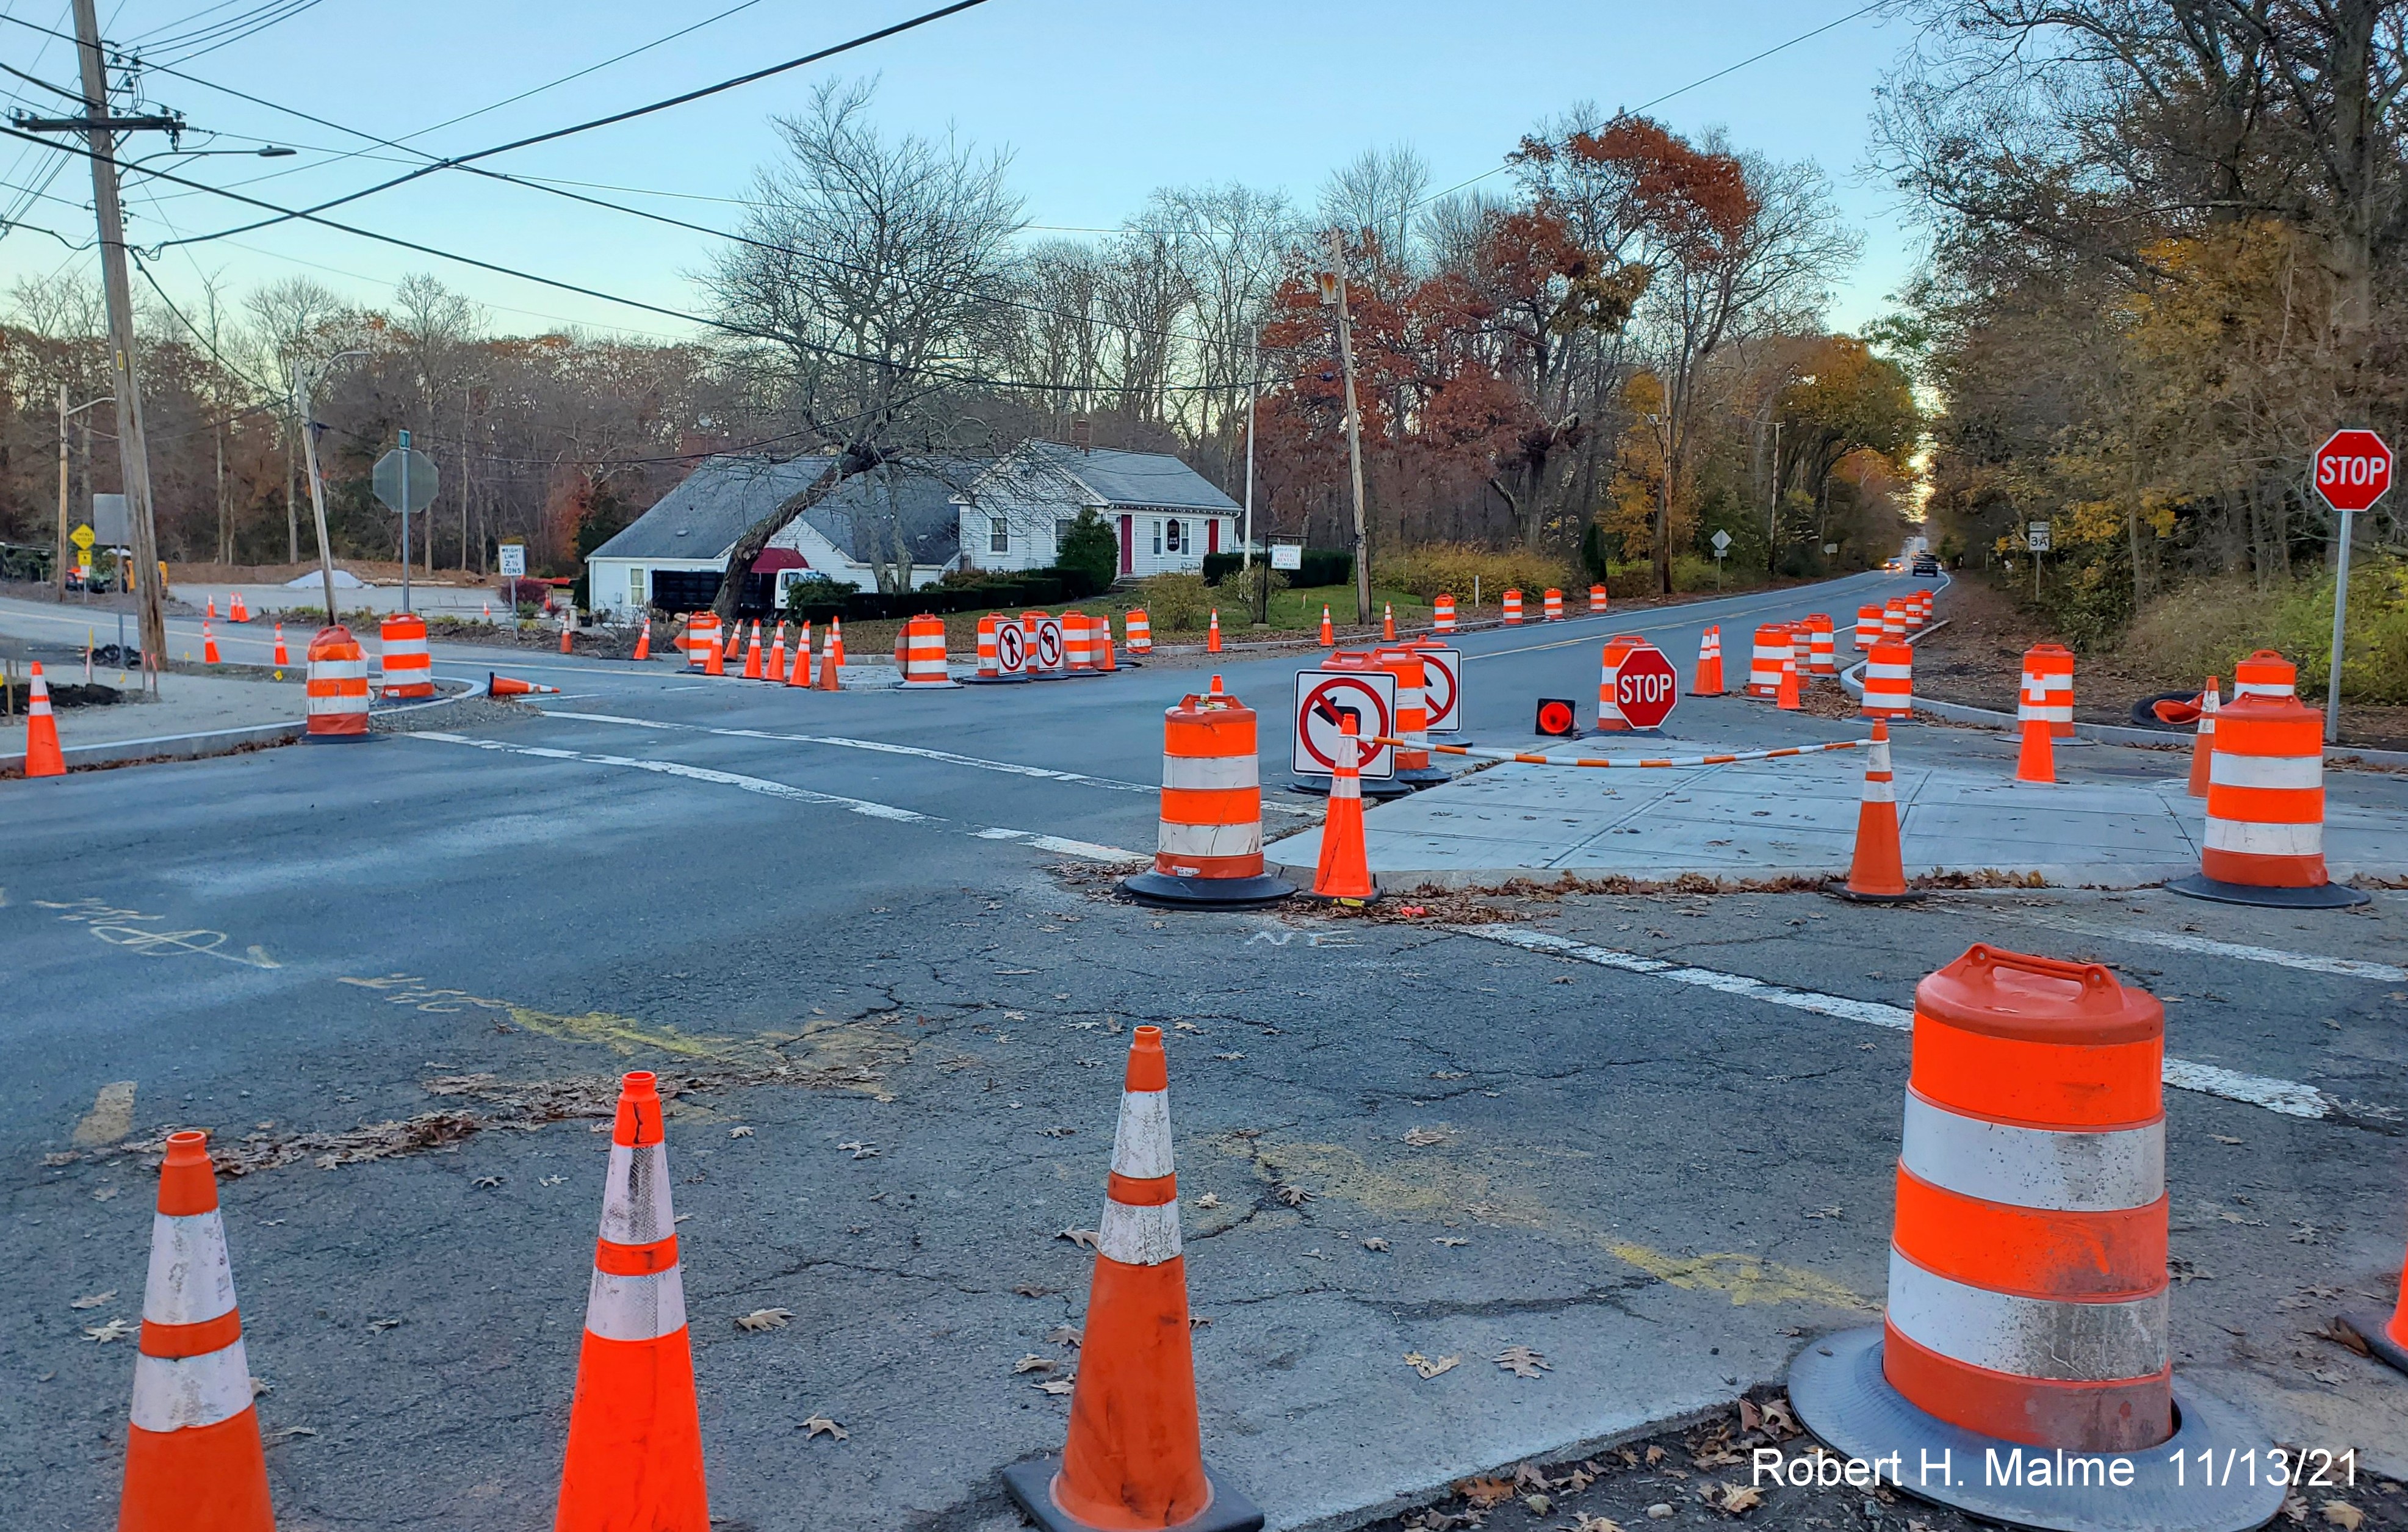 Image of completed traffic islands at intersection of Kilby Street and Chief Justice Cushing Highway (MA 3A) in Hingham, November 2021